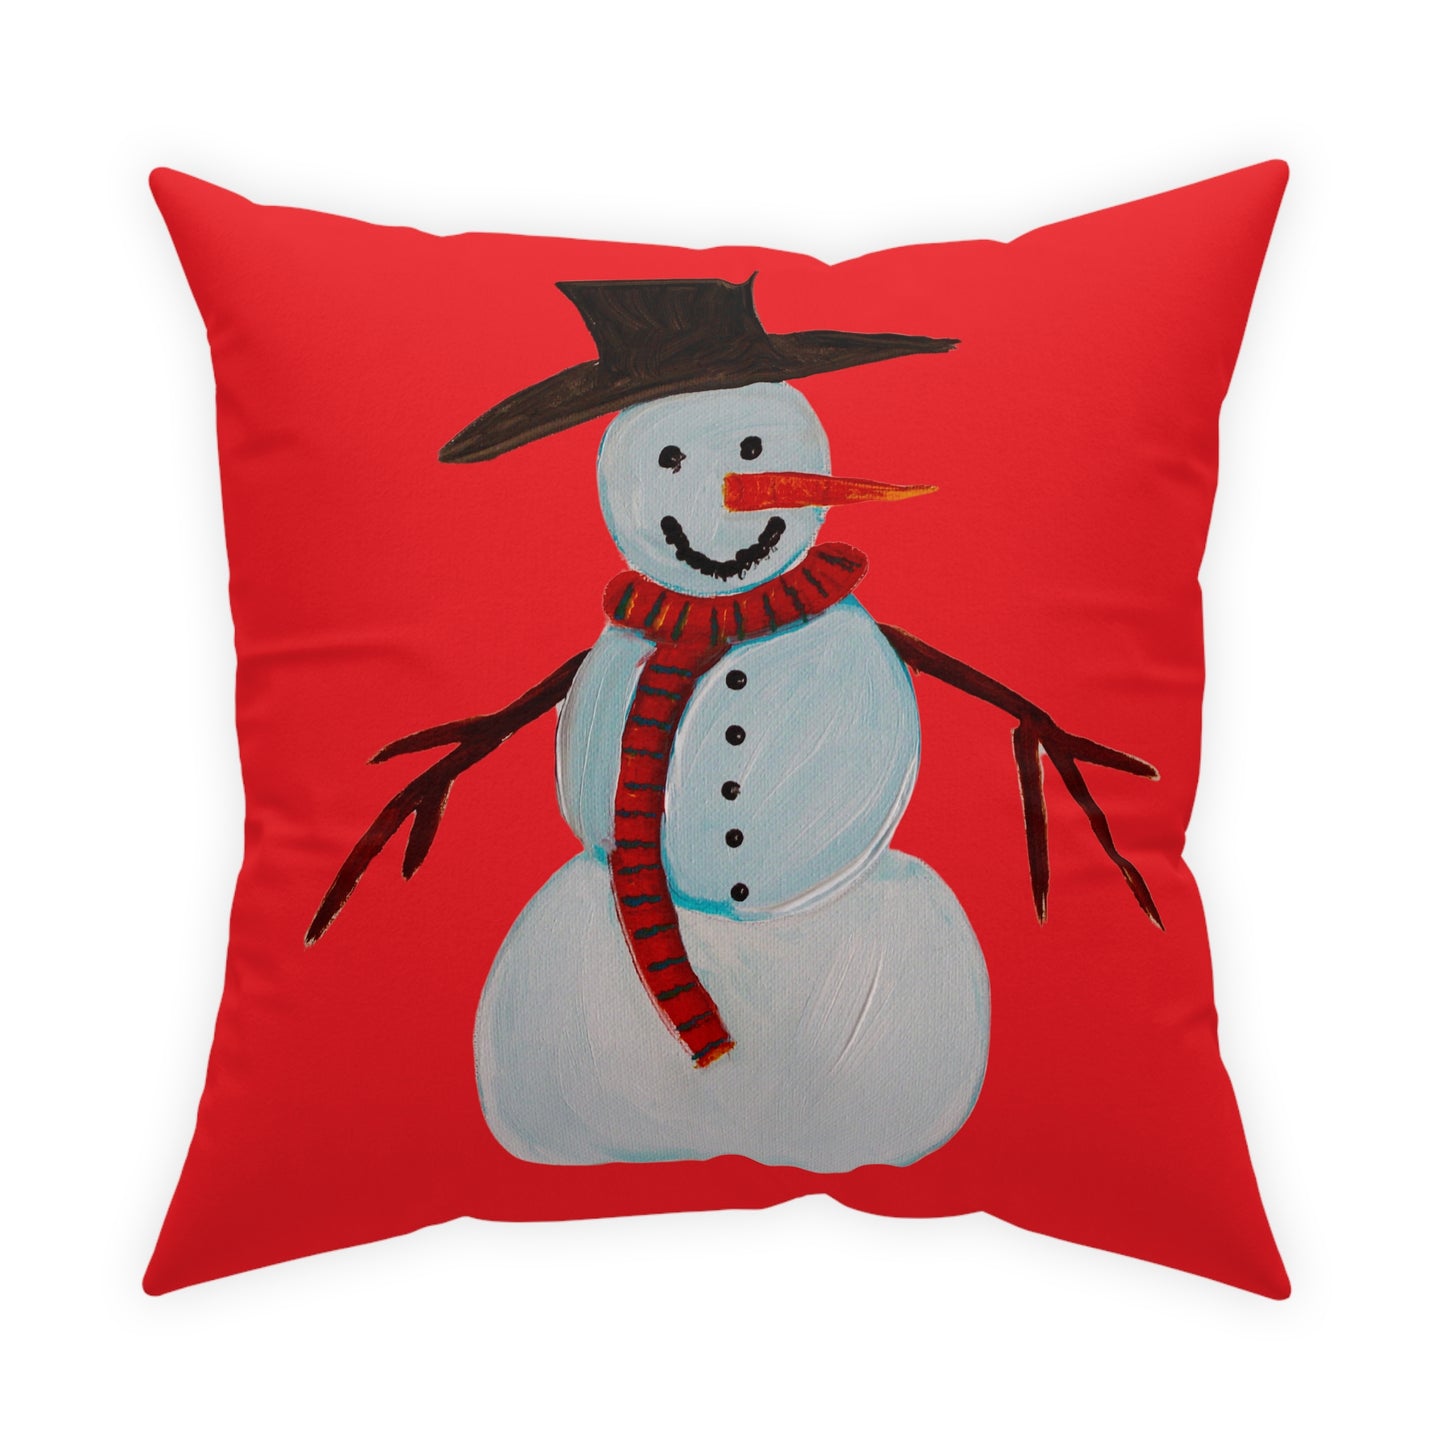 Holiday snowman - Red Throw Pillow - Colorful Throw pillow - Red Decorative Pillow - Throw pillow for Couch